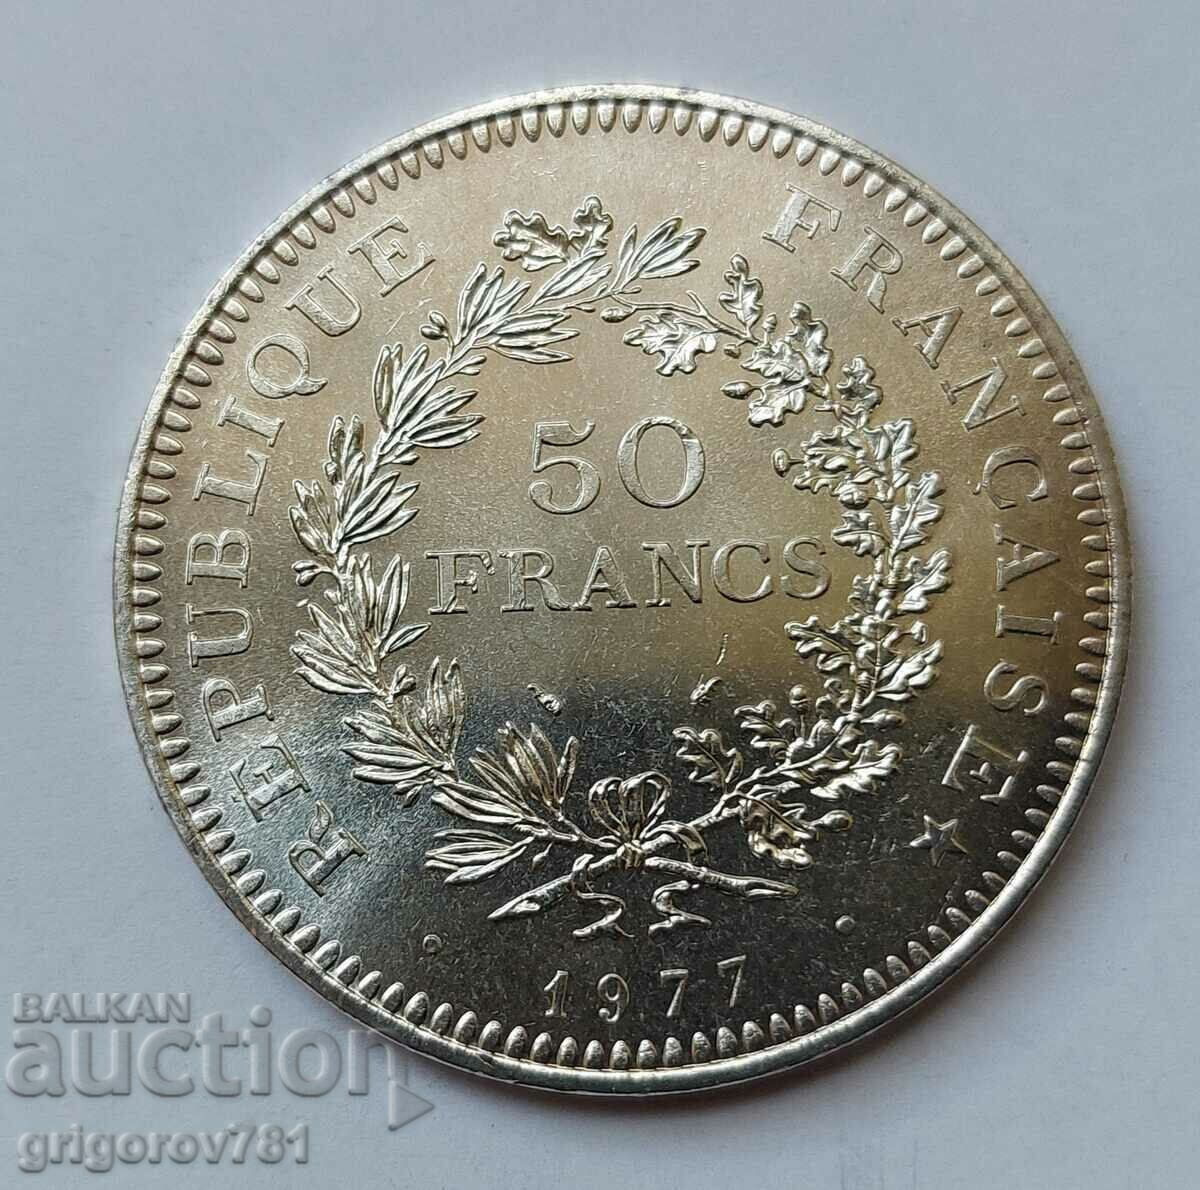 50 Francs Silver France 1977 - Silver Coin #37